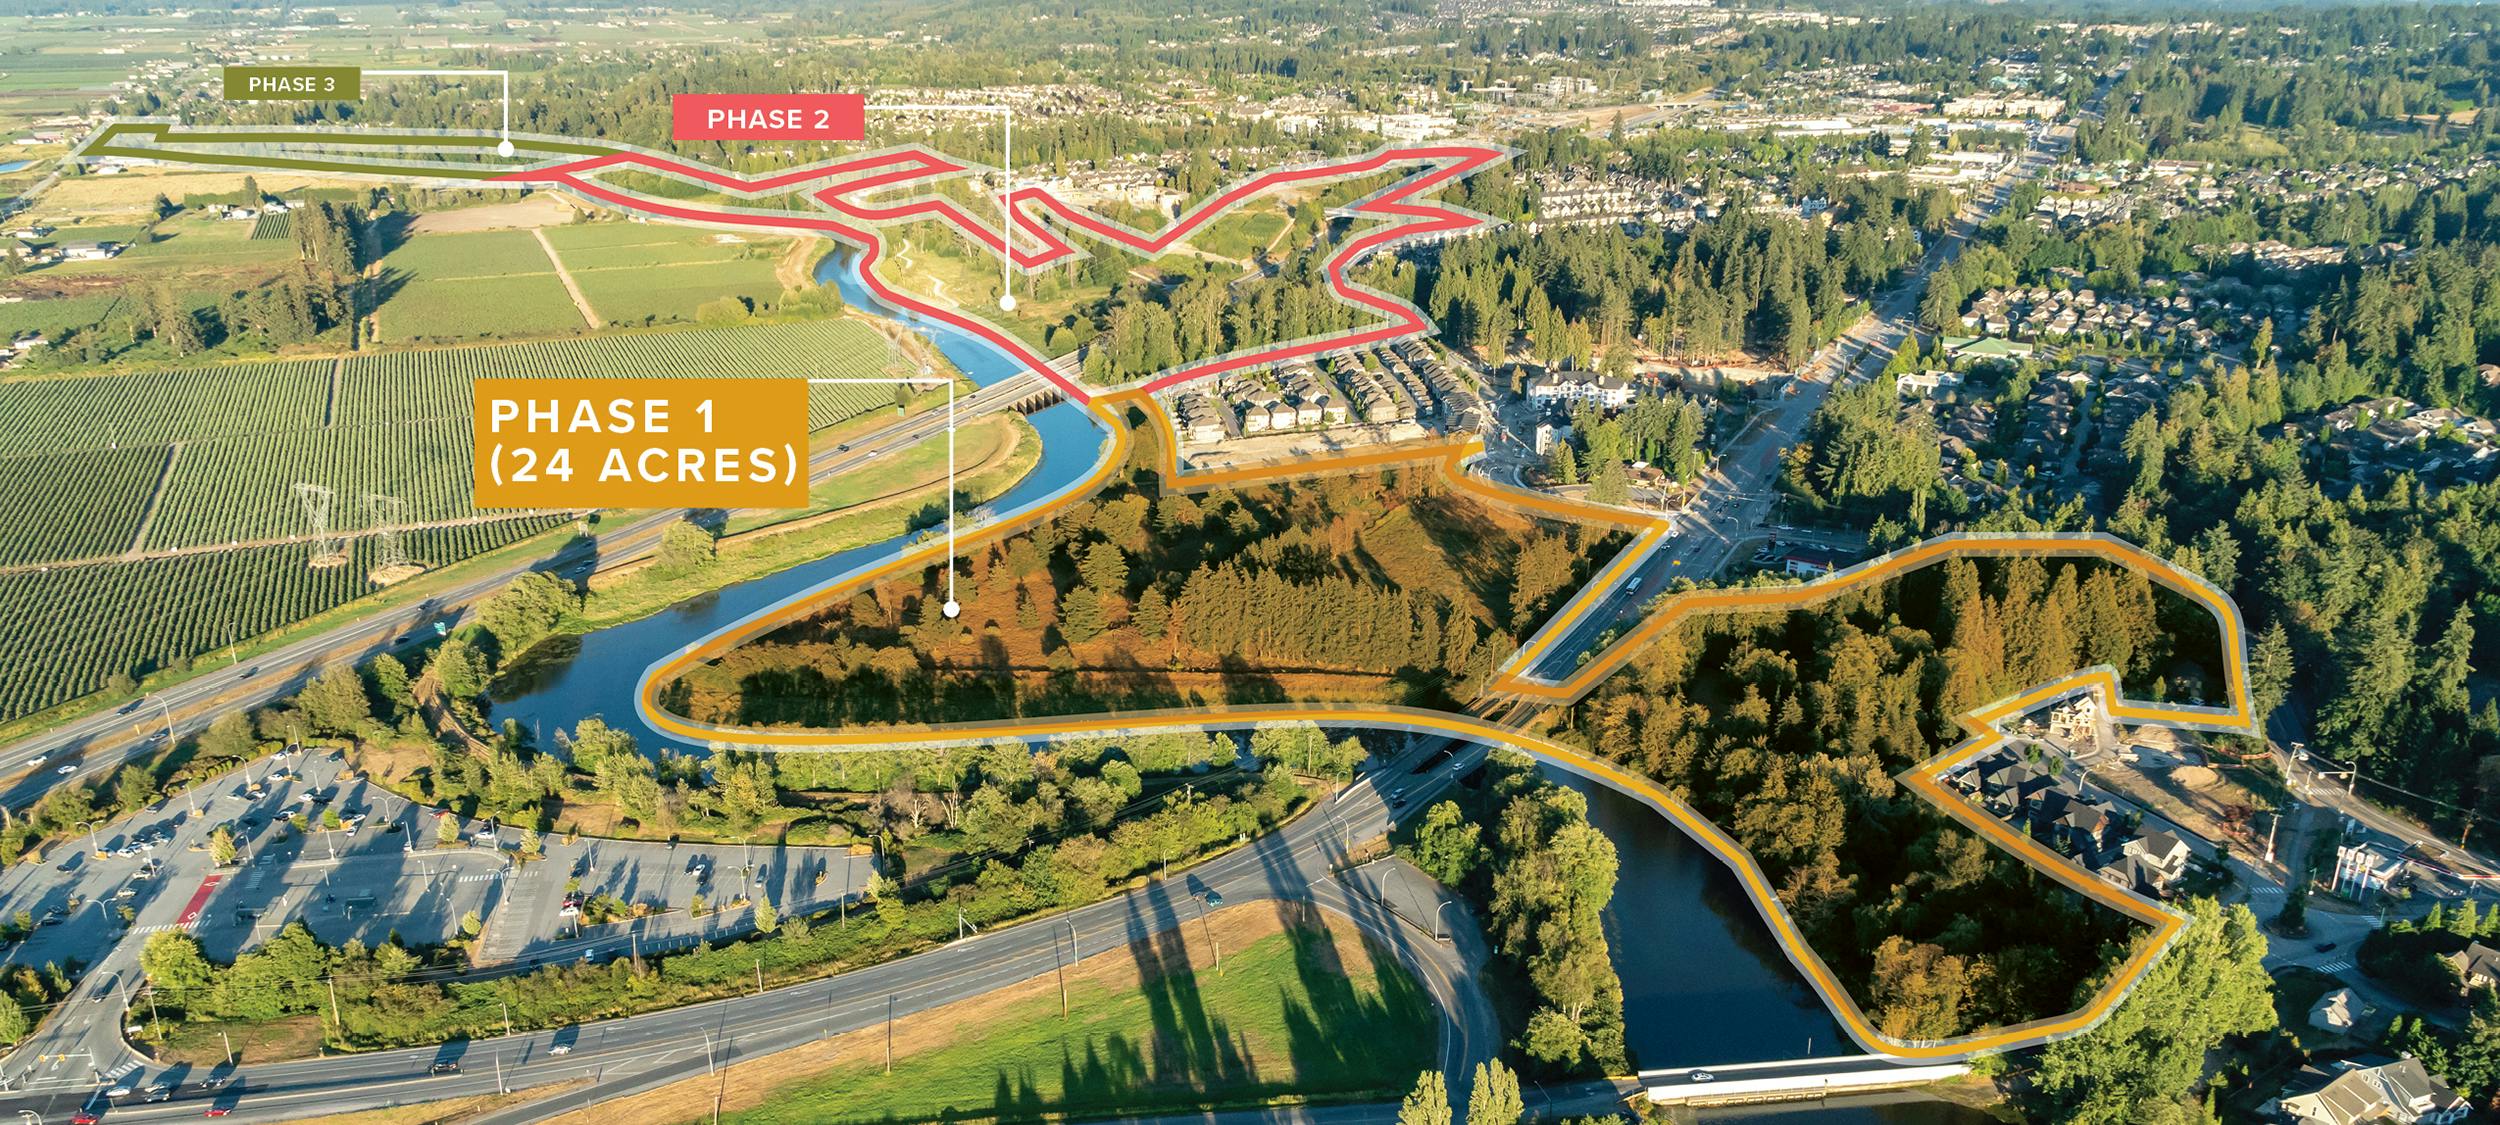  Aerial view of forest parkland, the river, park and ride, and roads.